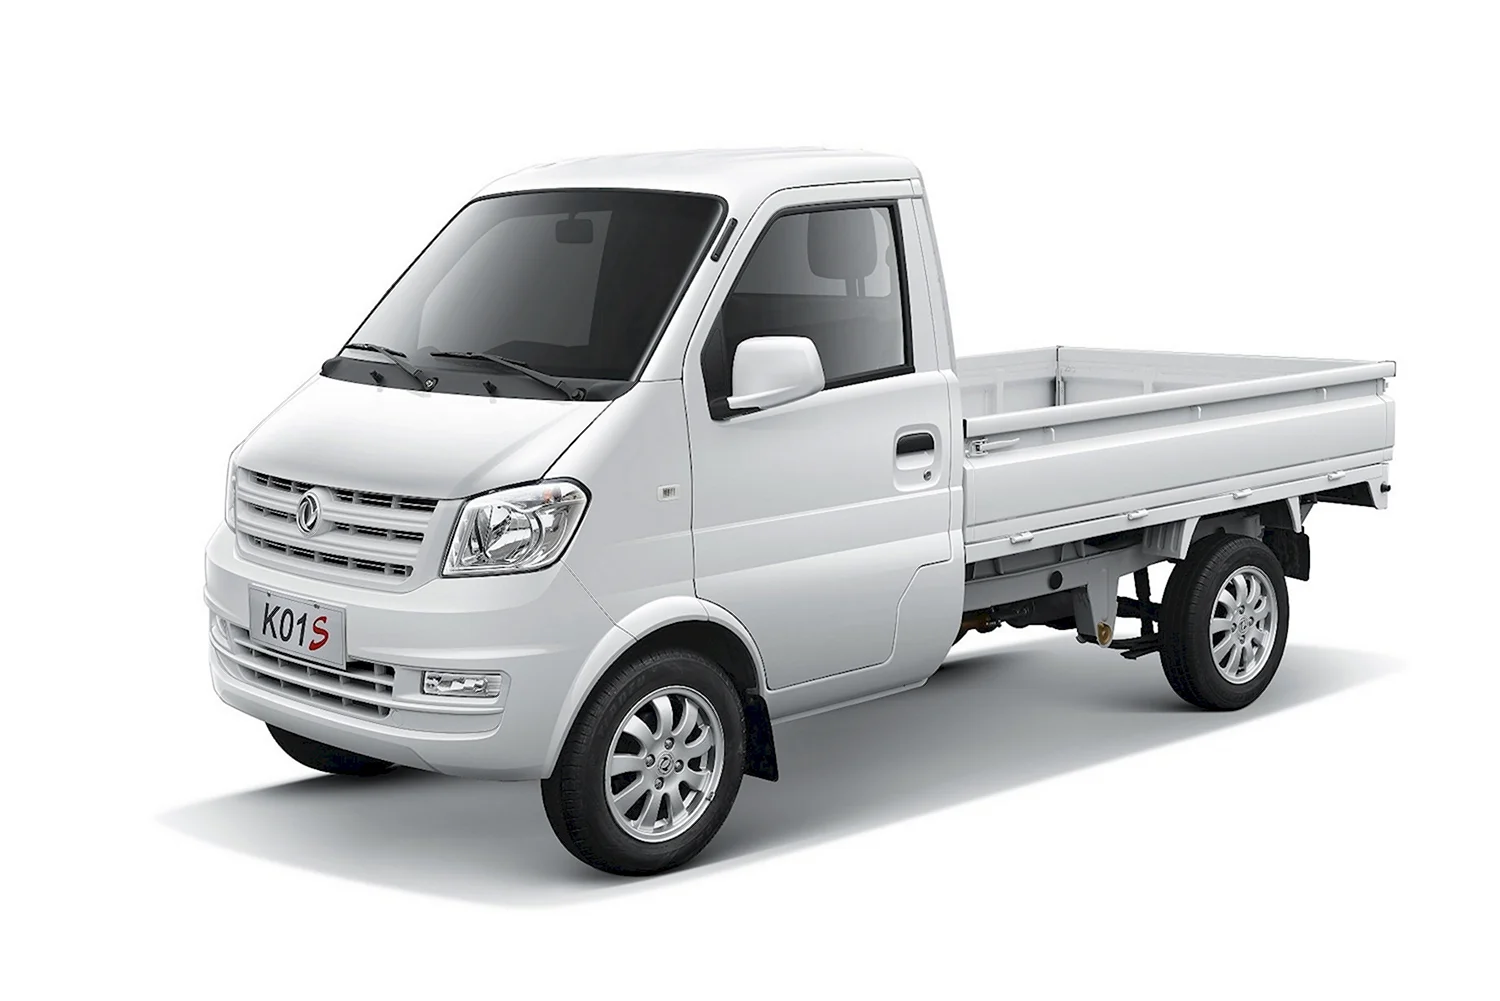 Dongfeng k01s